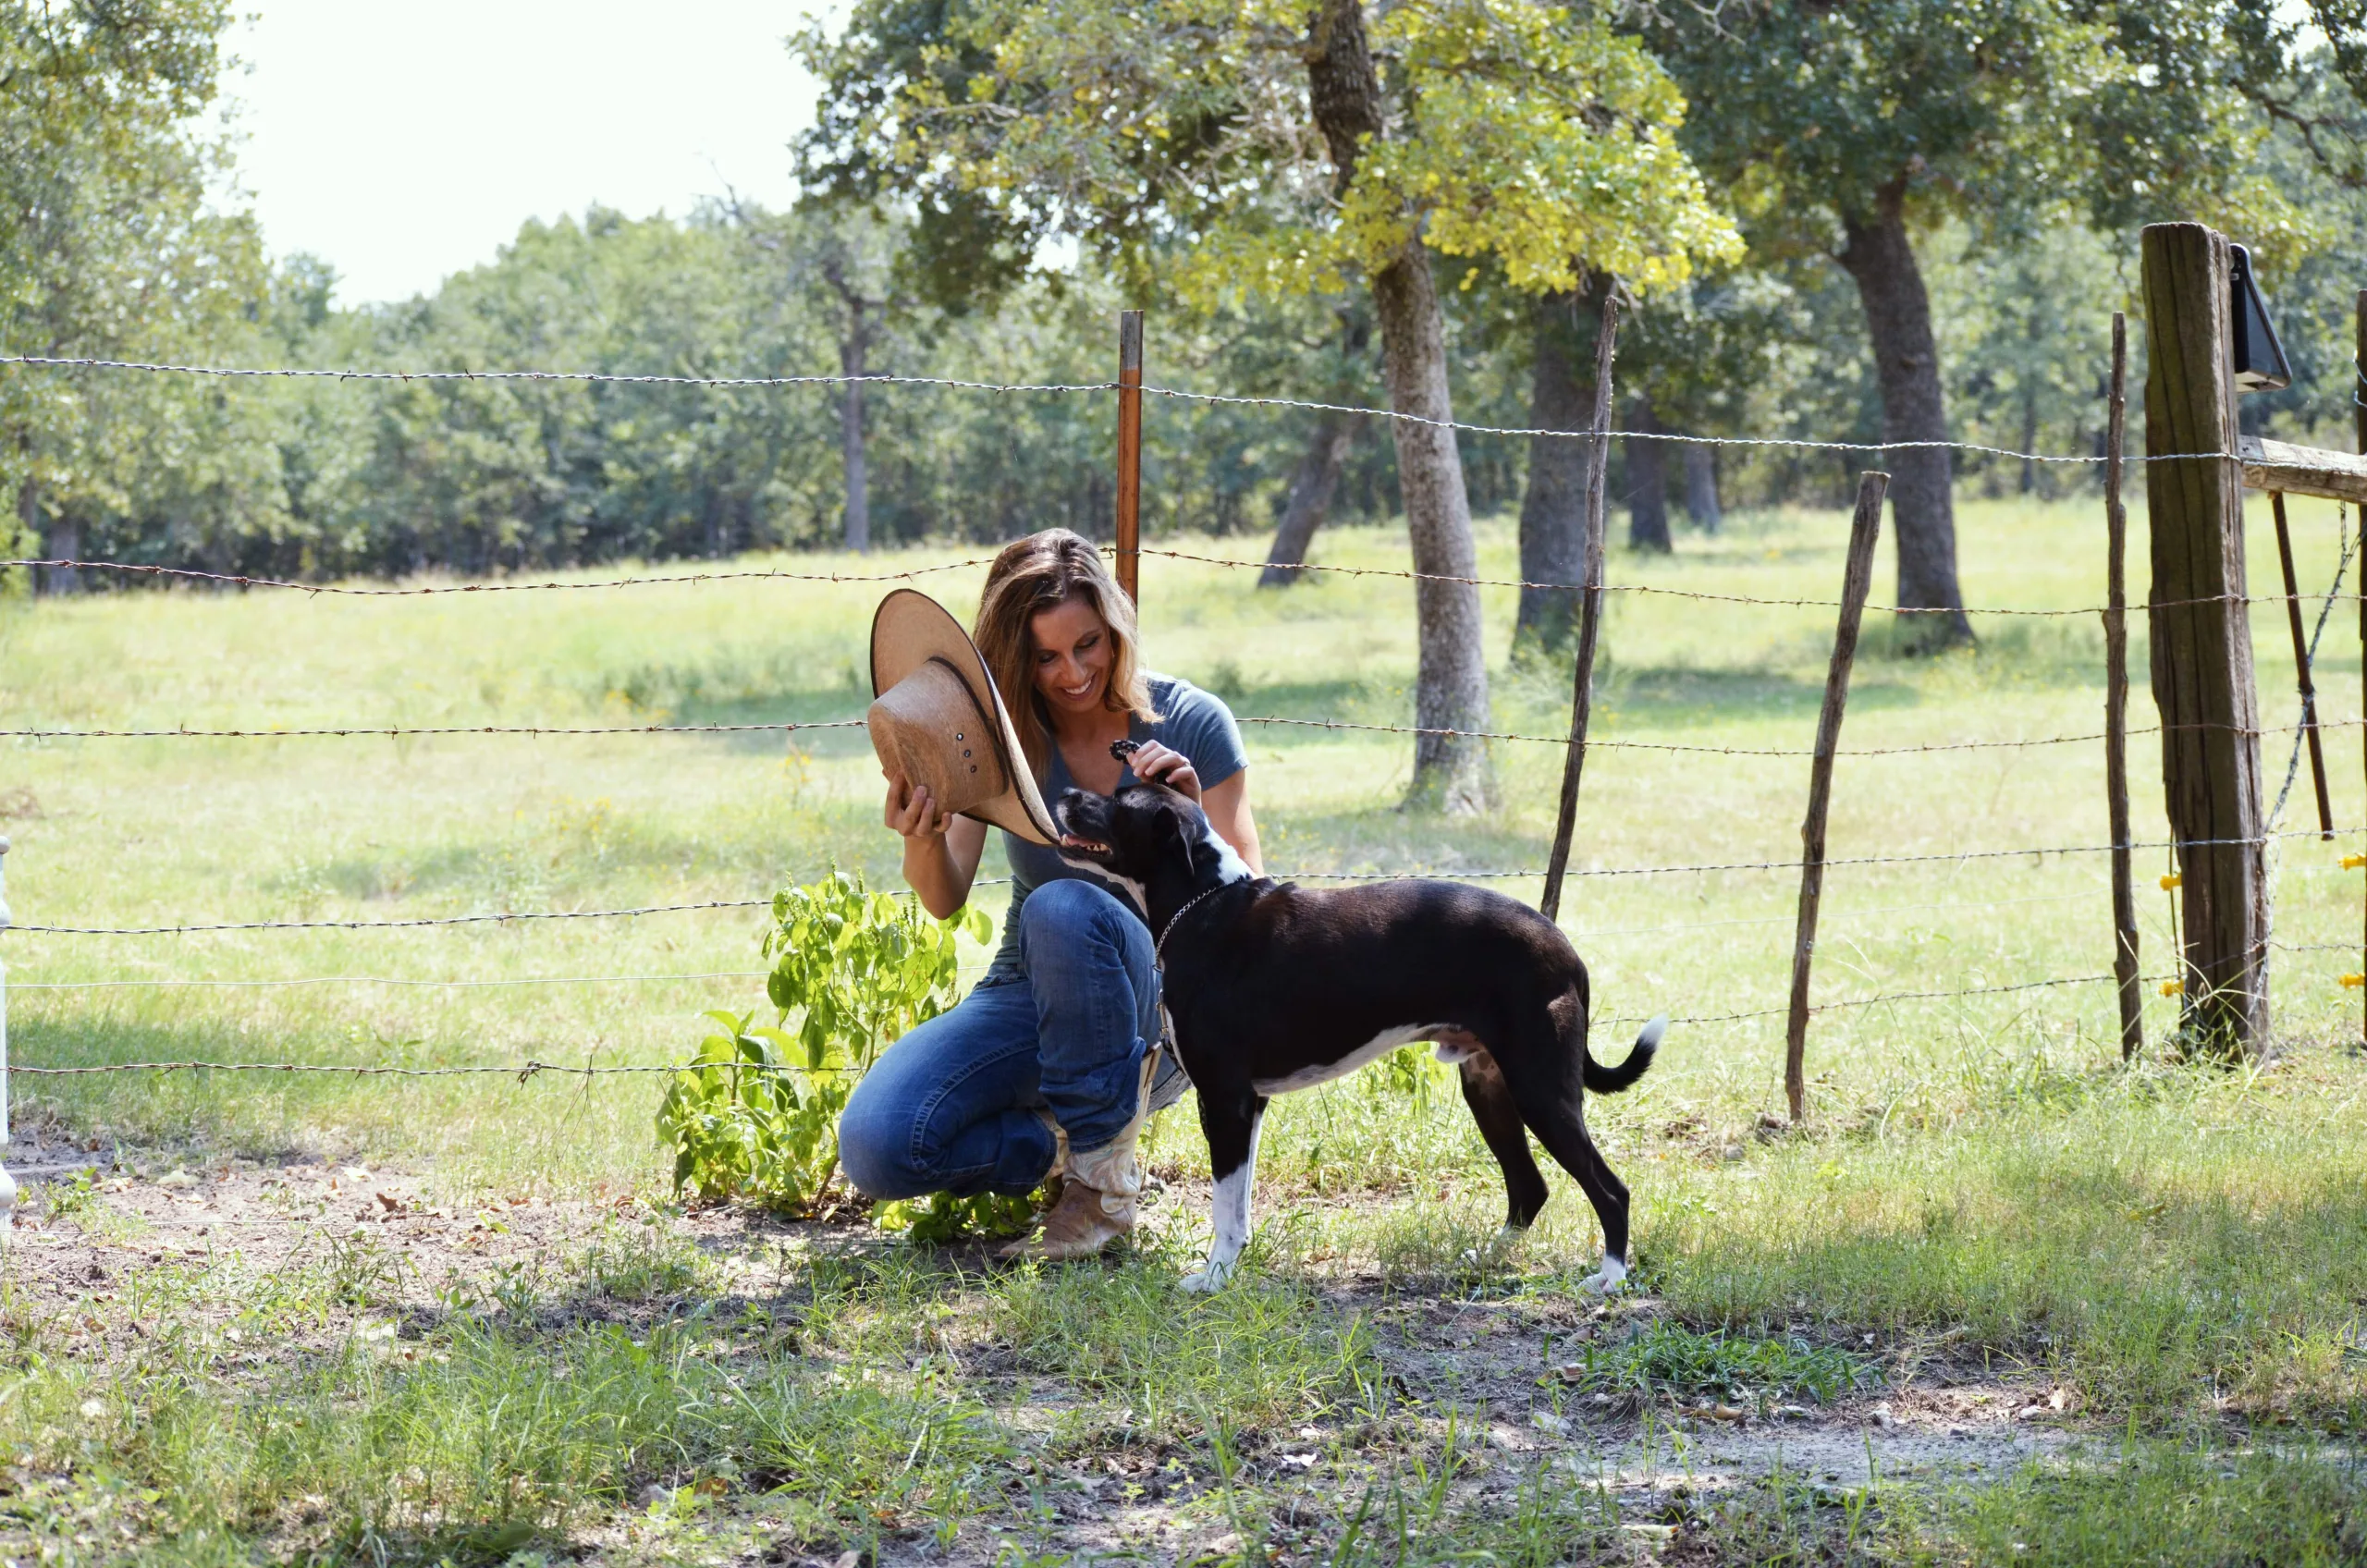 Woman kneeling with fedora and cattle dog in a grassy field with foliage and trees around.